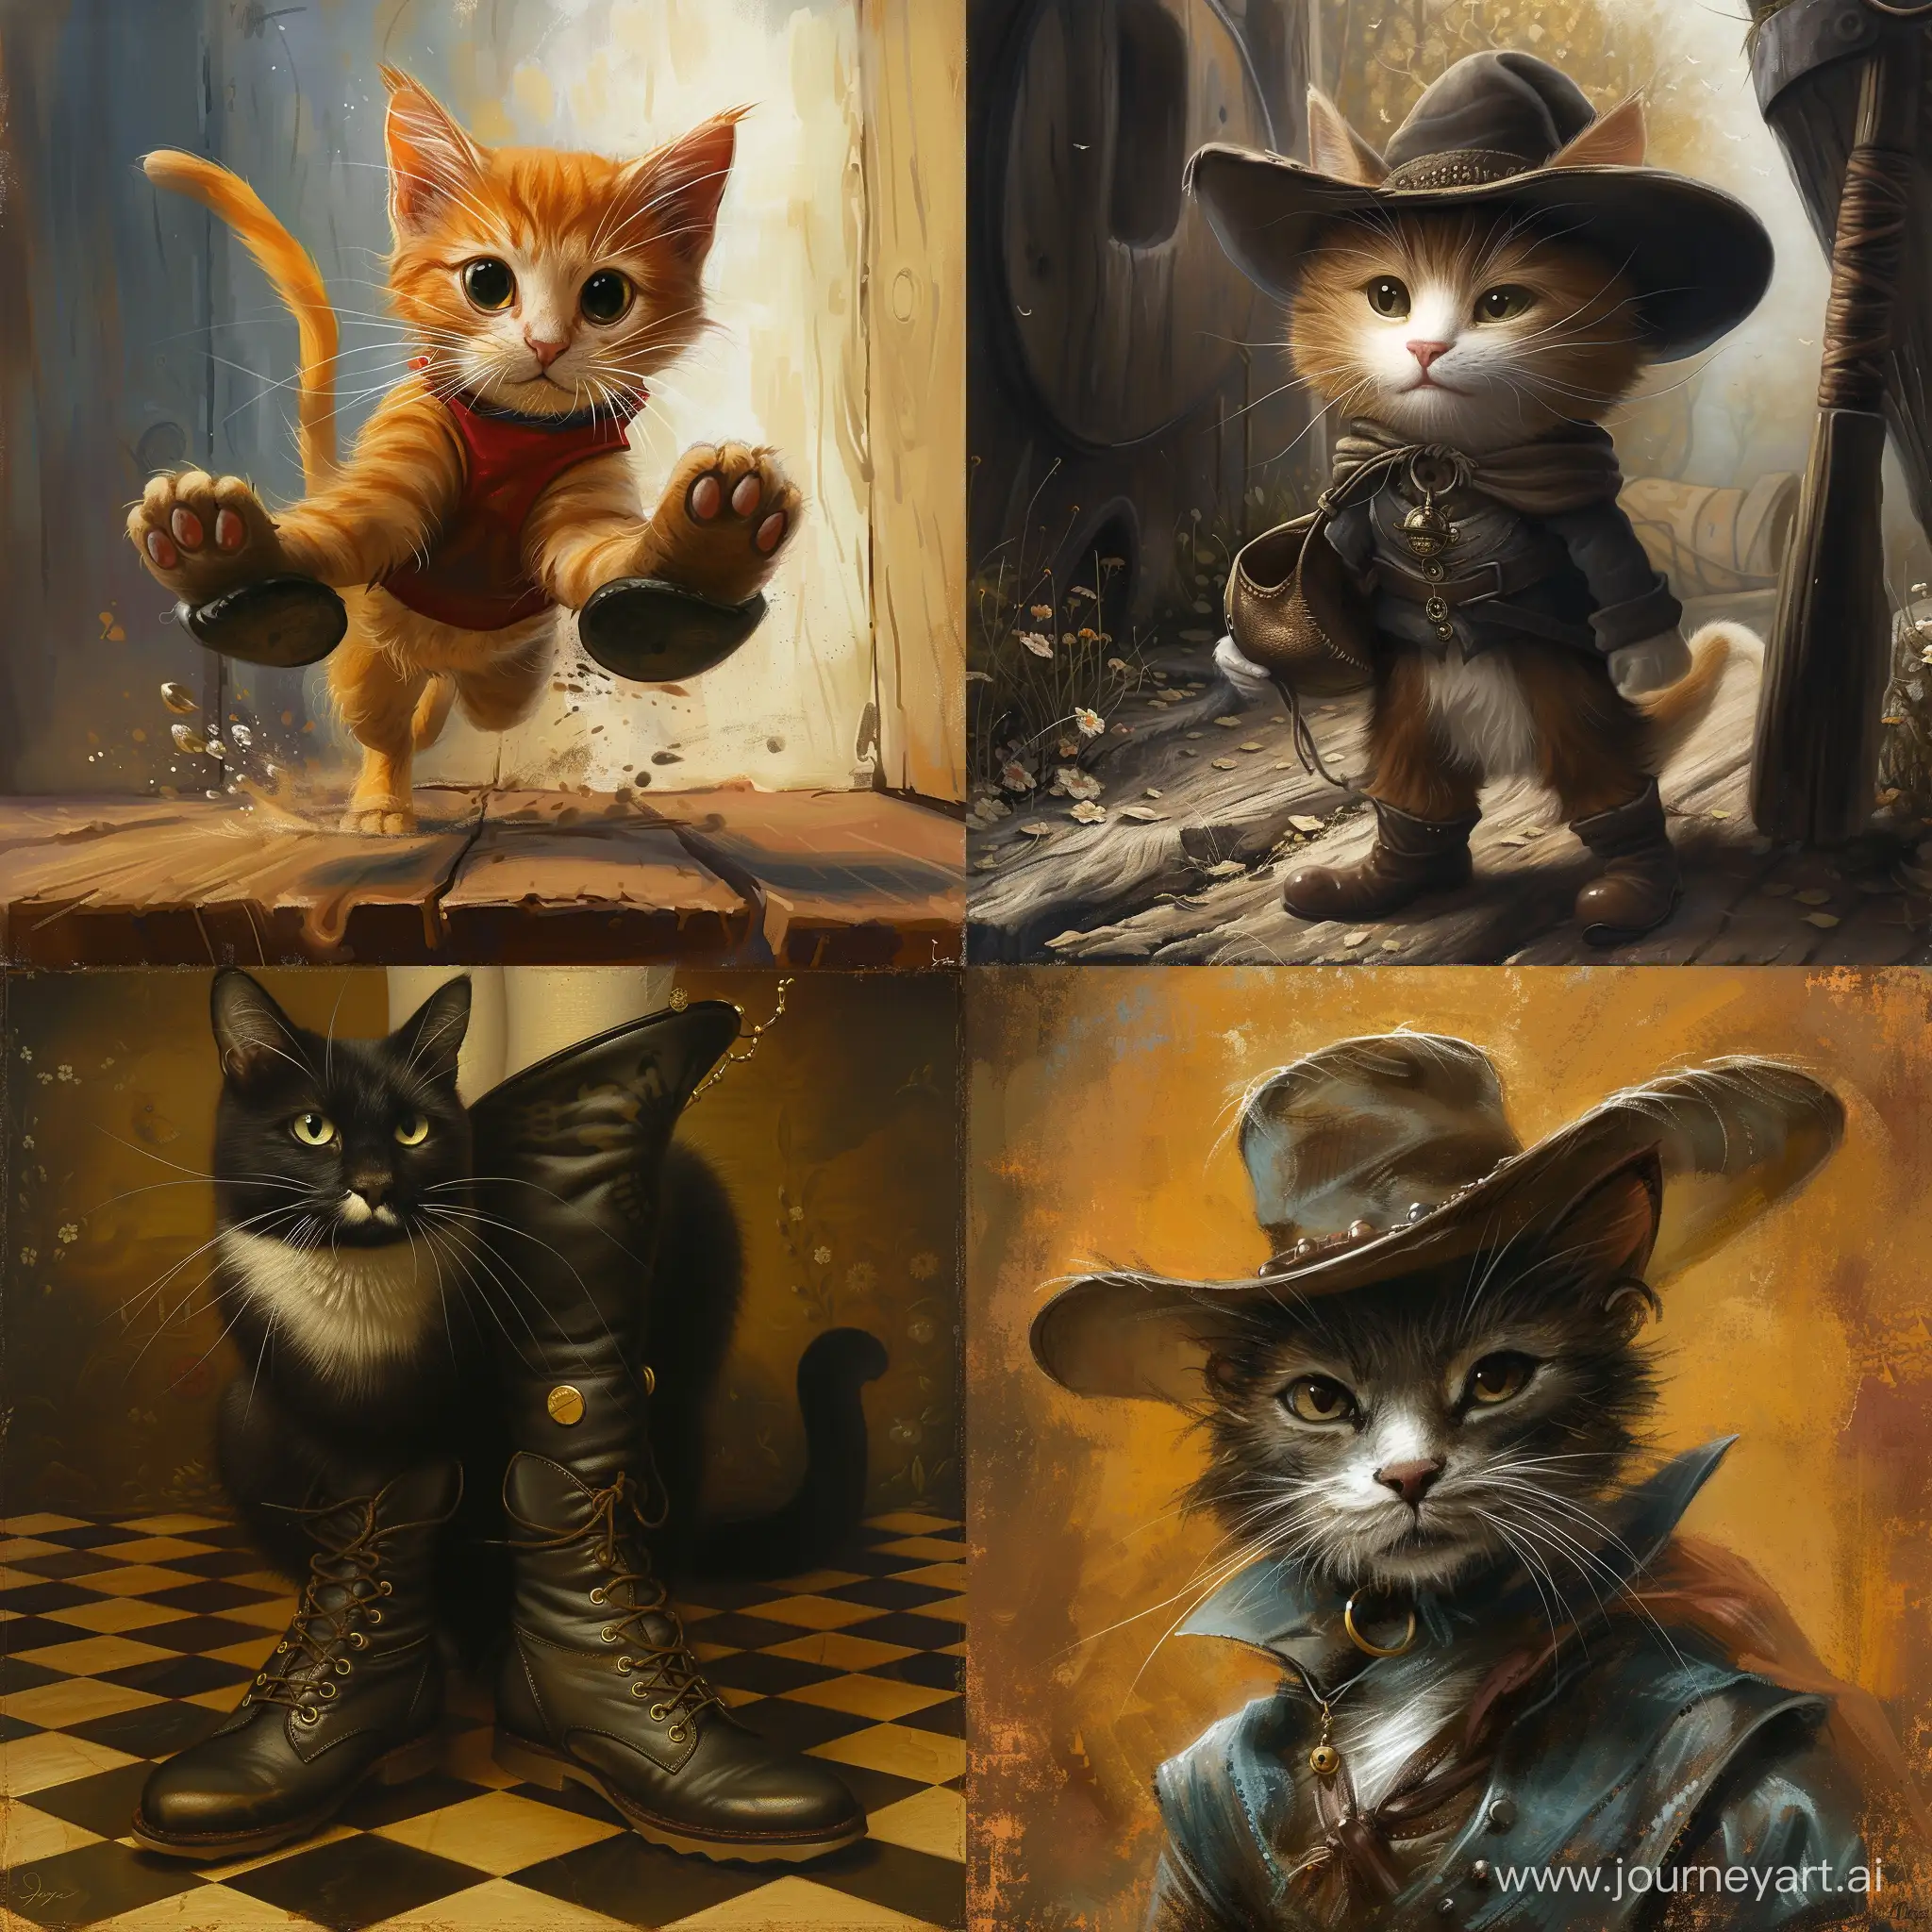 Charming-Cat-in-Boots-Poses-Elegantly-Square-Artwork